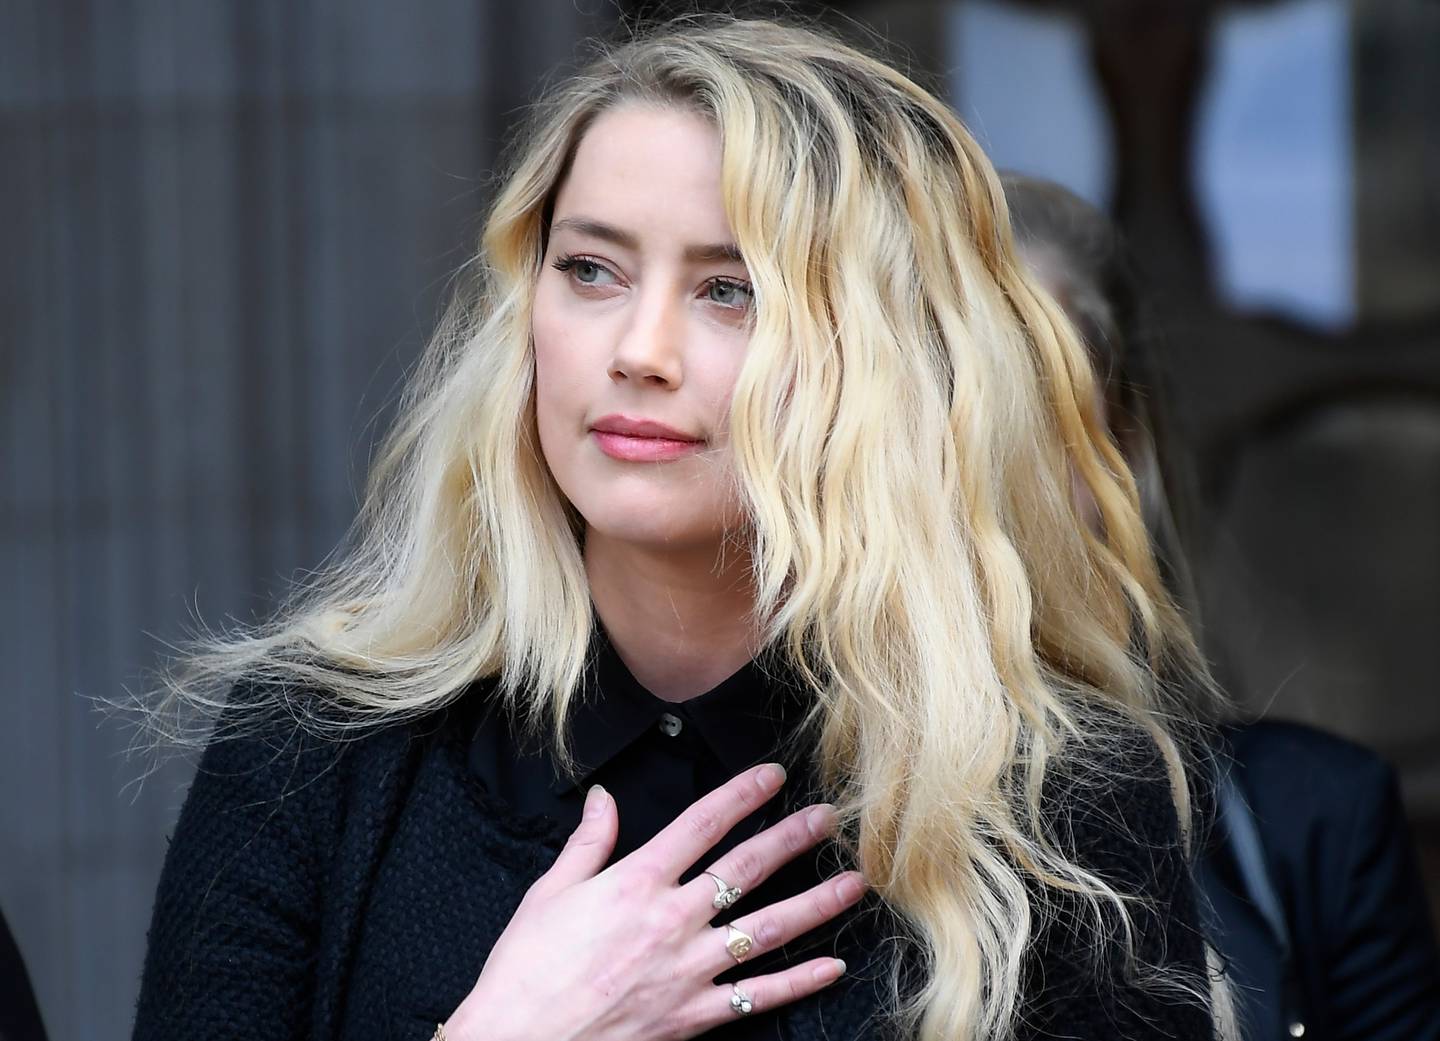 American actress Amber Heard, former wife of actor Johnny Depp. Photo / AP